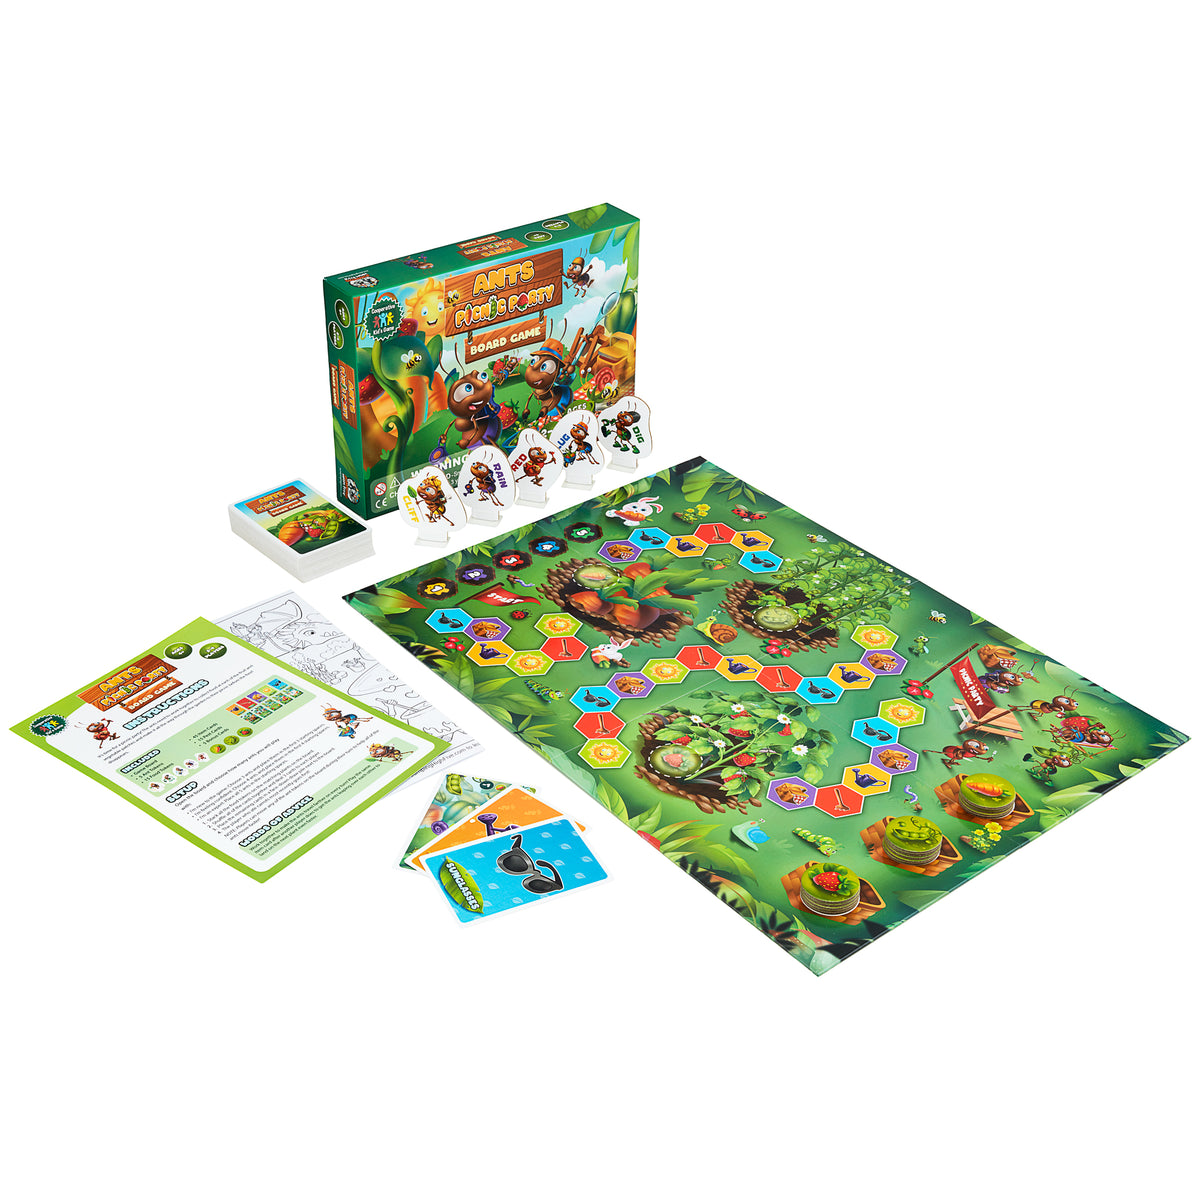 Is There a Board Game of Plants vs. Zombies?